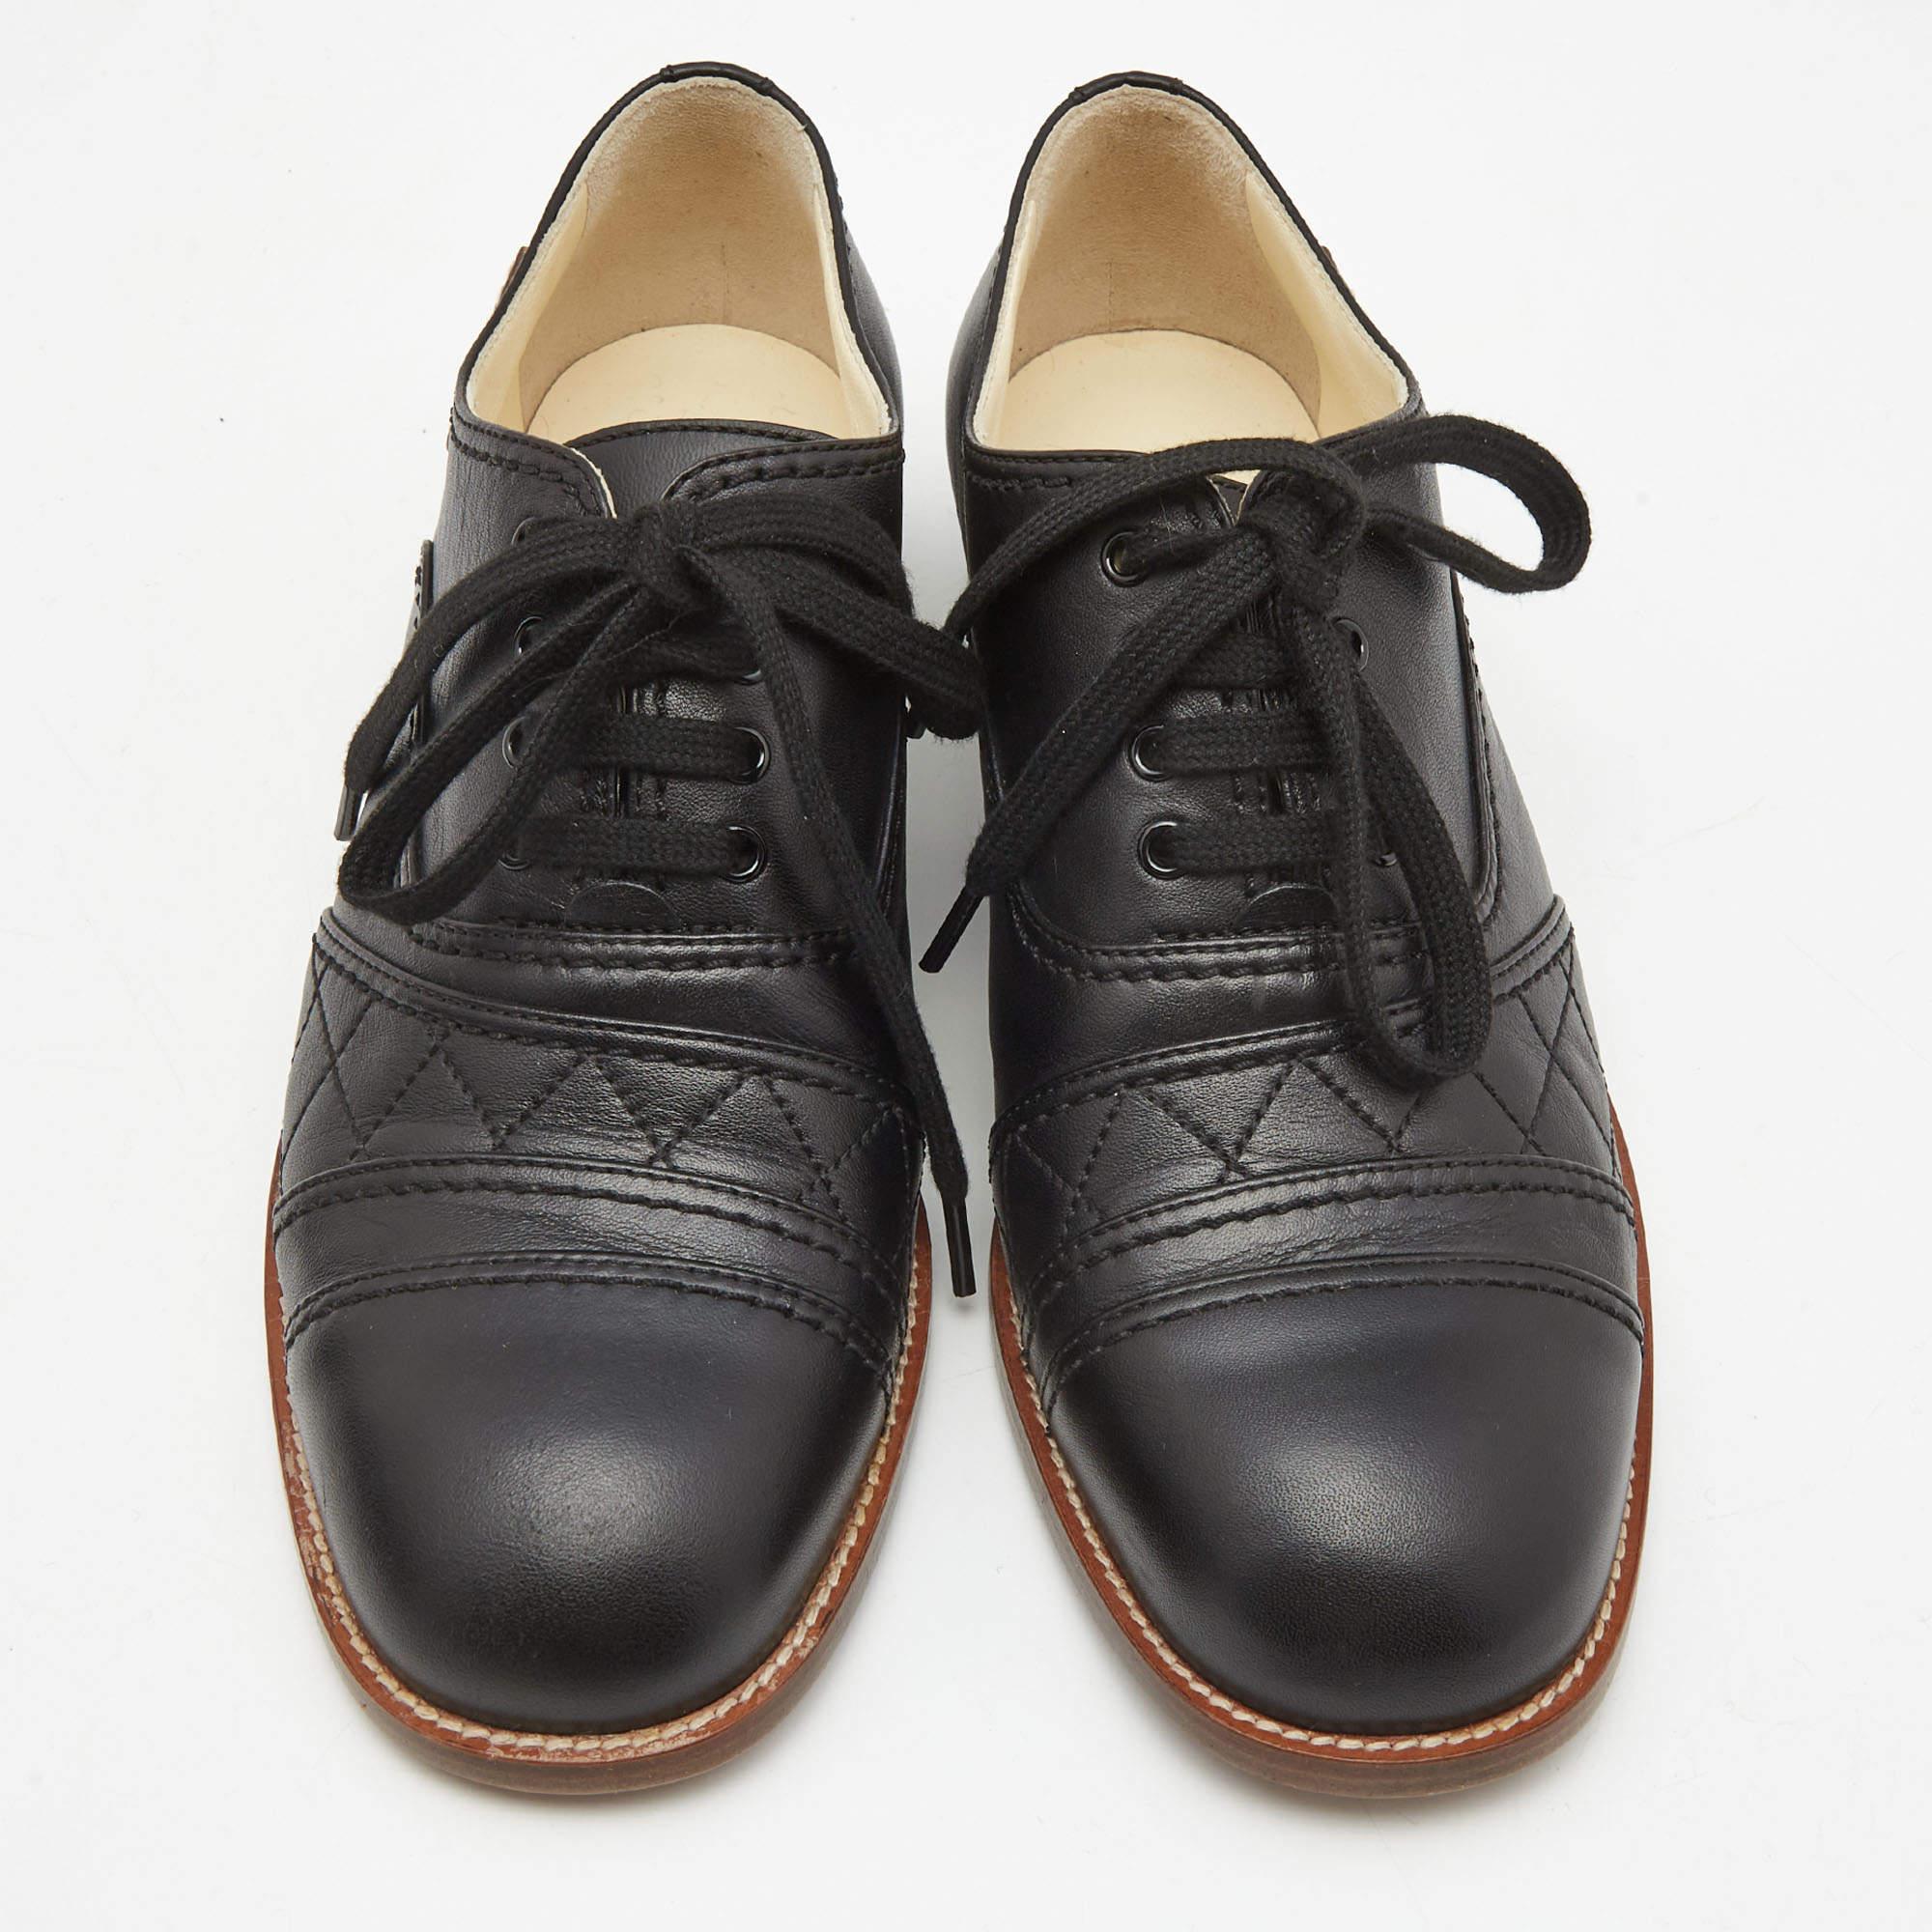 Give your formal outfit a classy and smart finish with this pair of Chanel oxfords. Meticulously crafted from leather, it has been styled with lace-up vamps, durable soles, and a quilted pattern.

